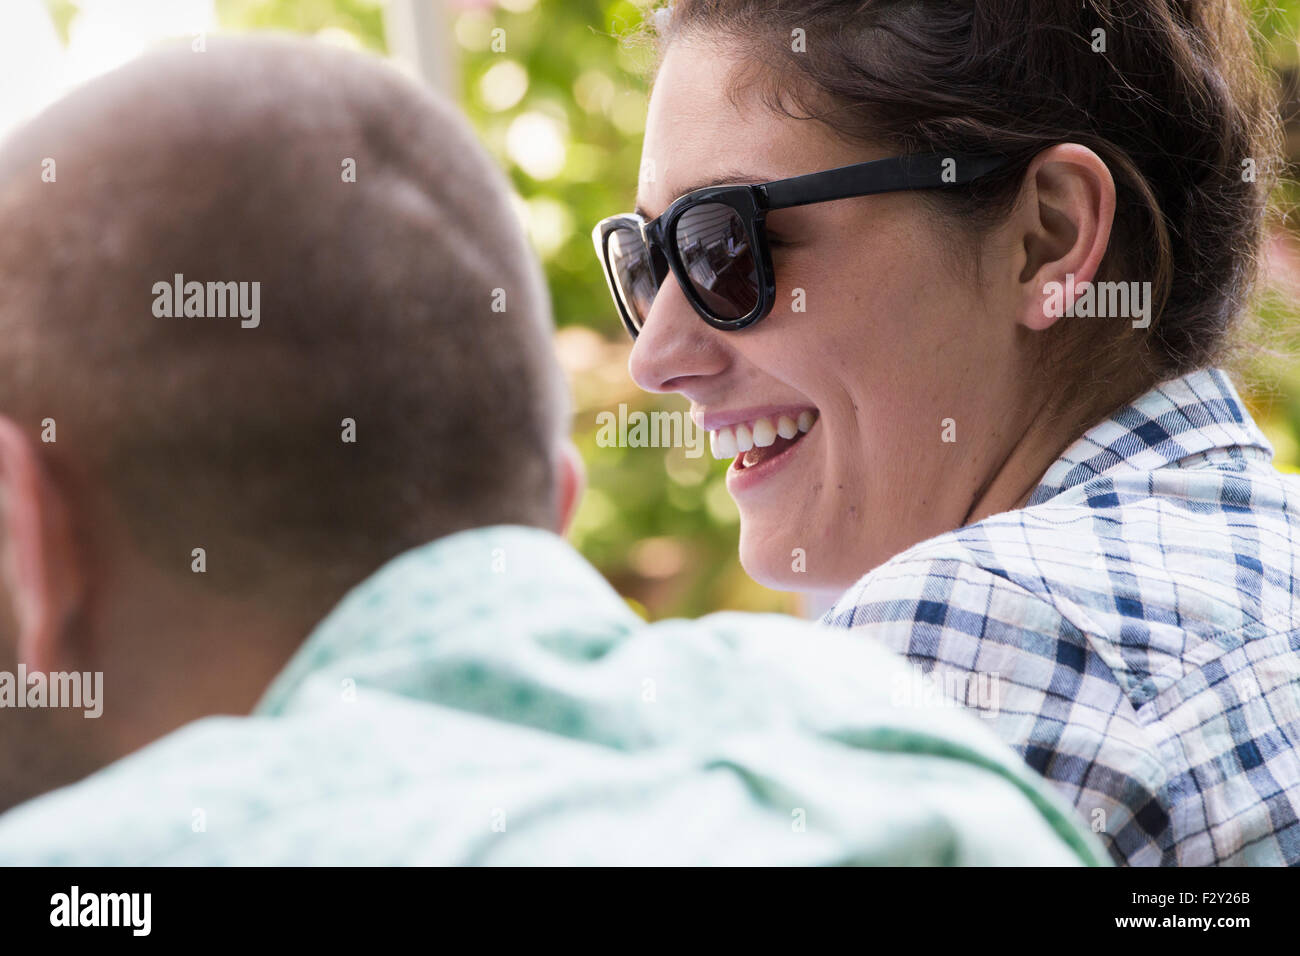 A young man and woman sitting side by side, smiling. Stock Photo